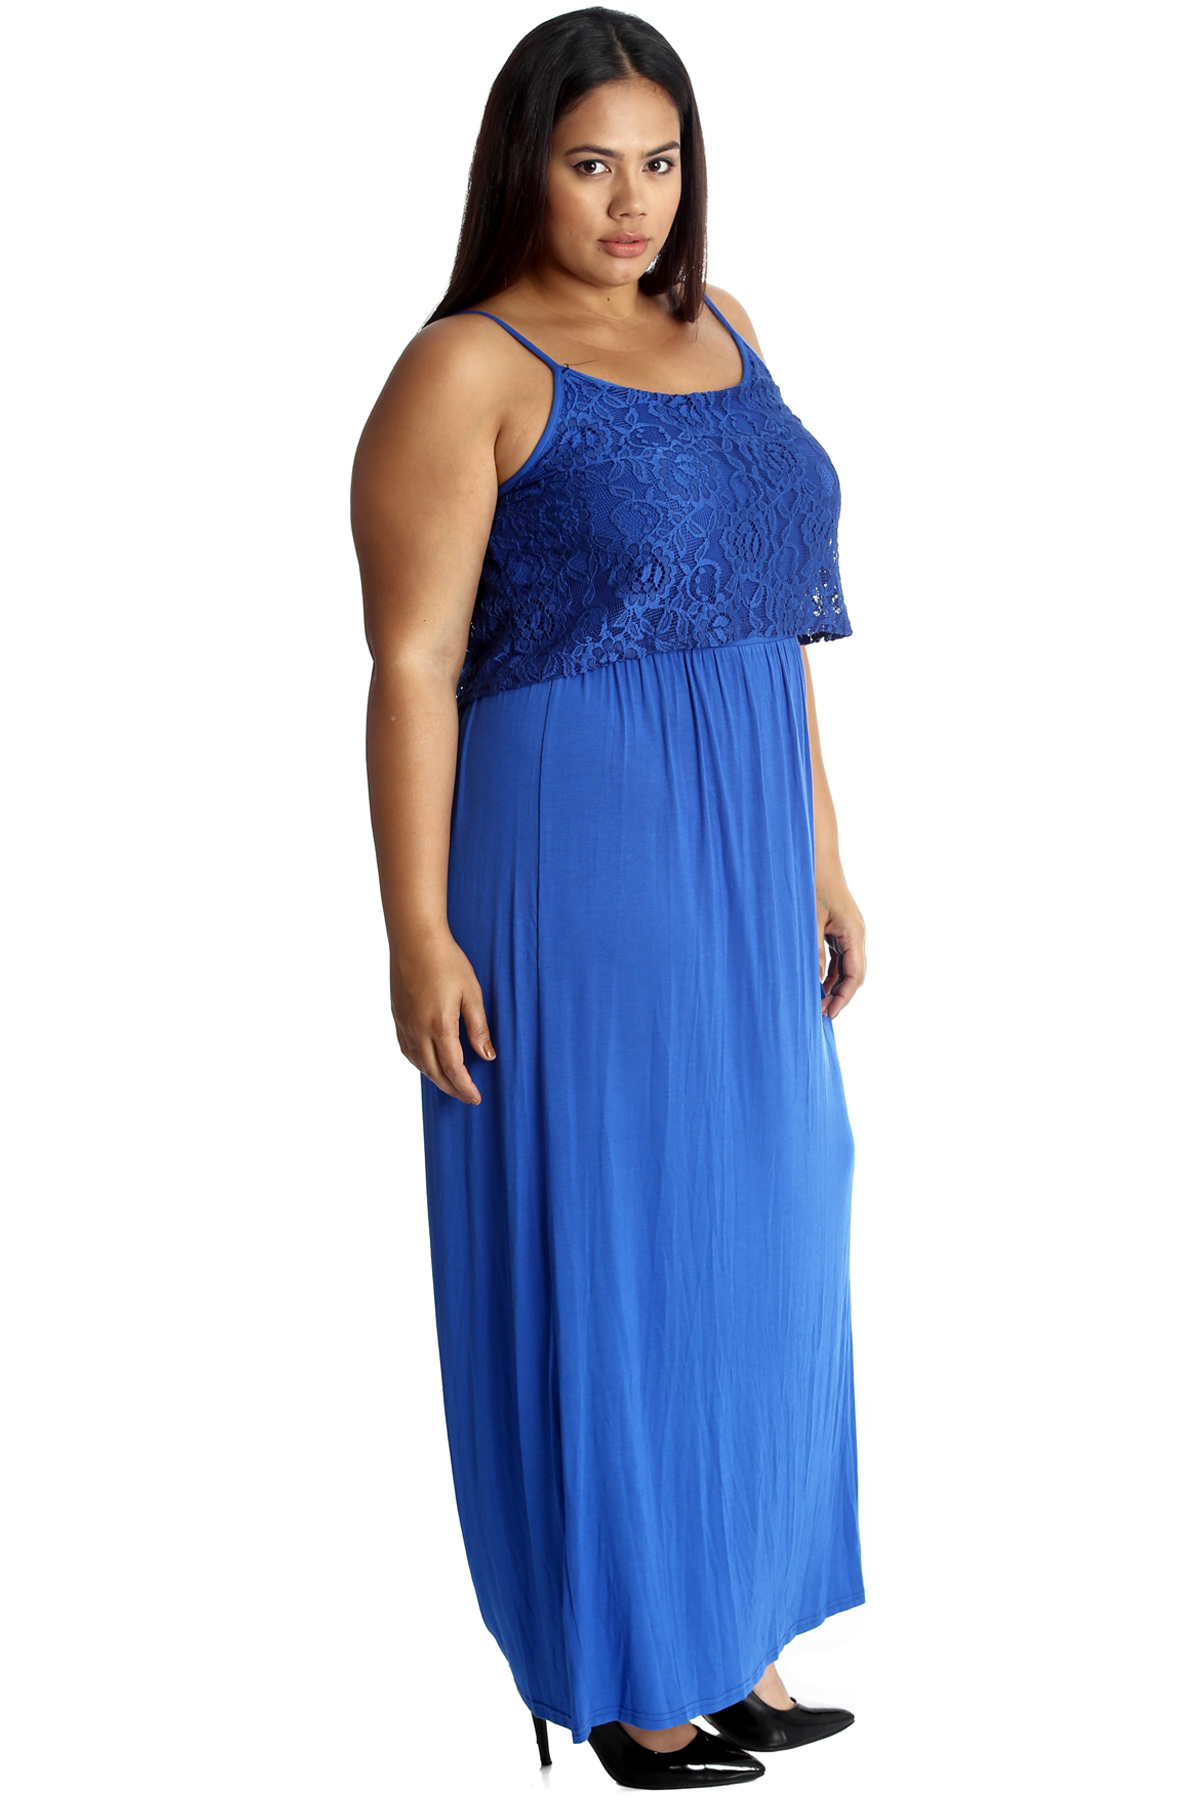 New Womens Dress Plus Size Maxi Ladies Floral Lace Full Length